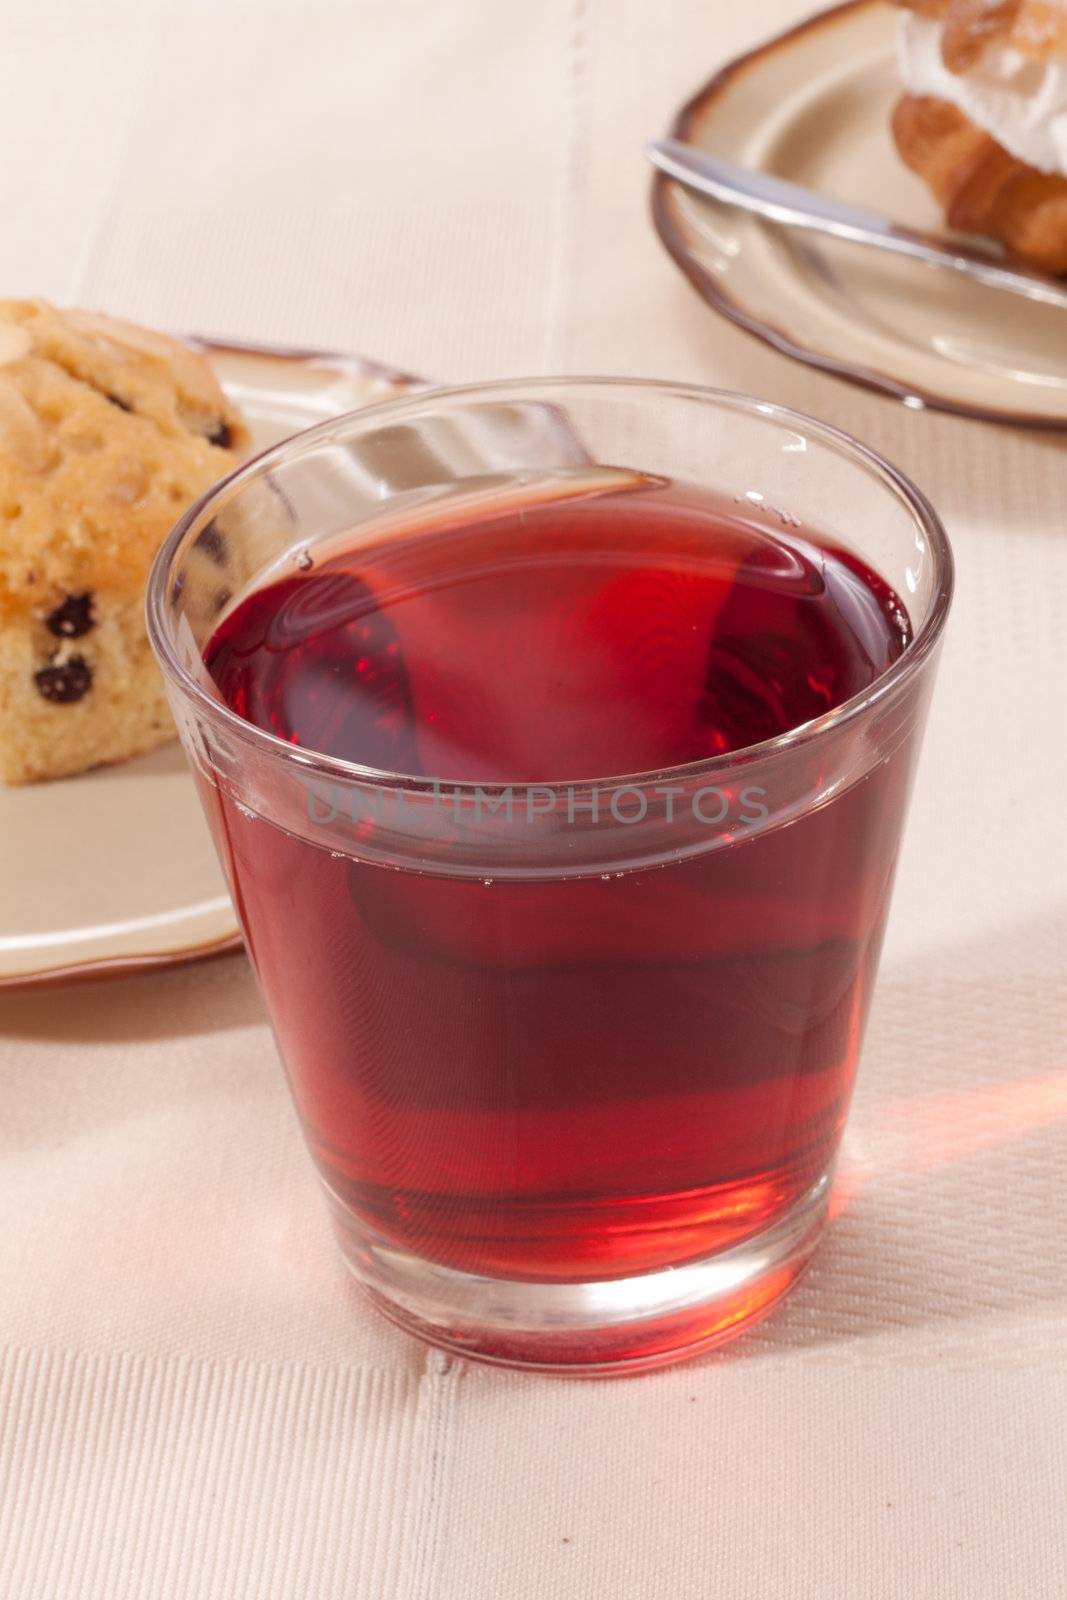 a glass of juice on a table with cookies